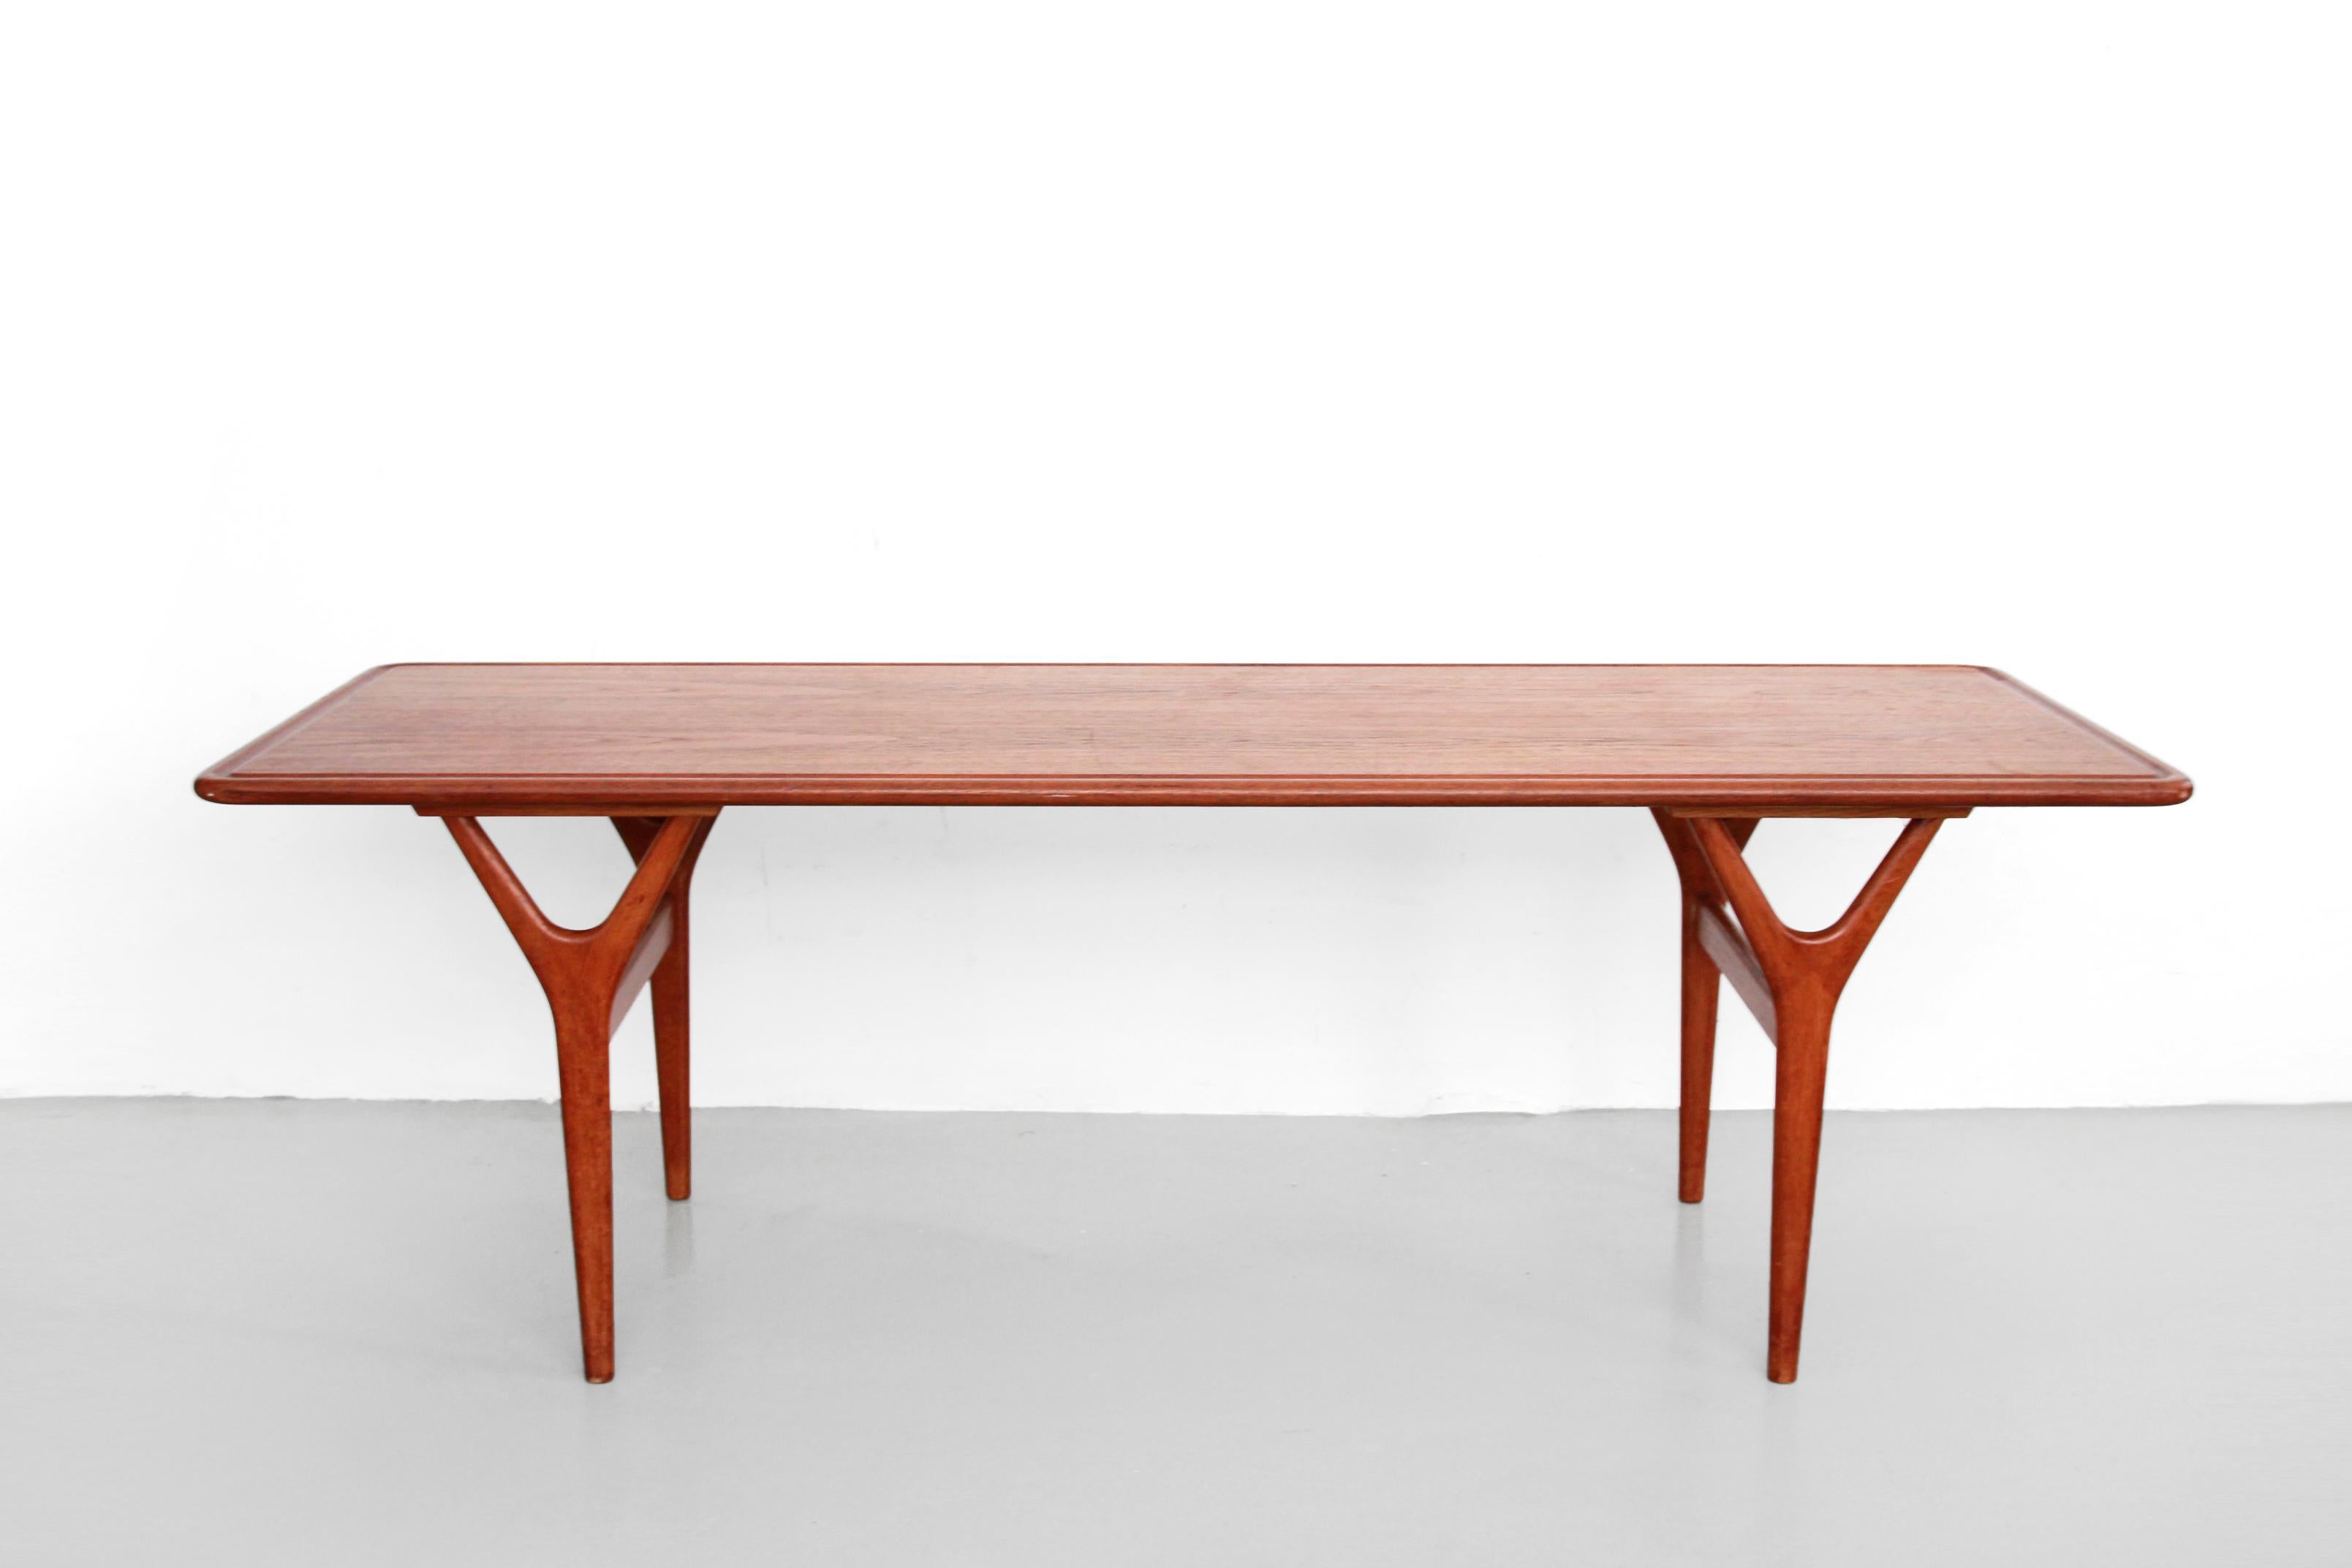 Beautiful and rare organic shaped teak coffee table designed by Kurt Ostervig and produced by Jason Mobler from Denmark in the late 1950s. Made of solid oak wood frame and a teak tabletop with rounded edges. Under the tabletop is an extra leave for